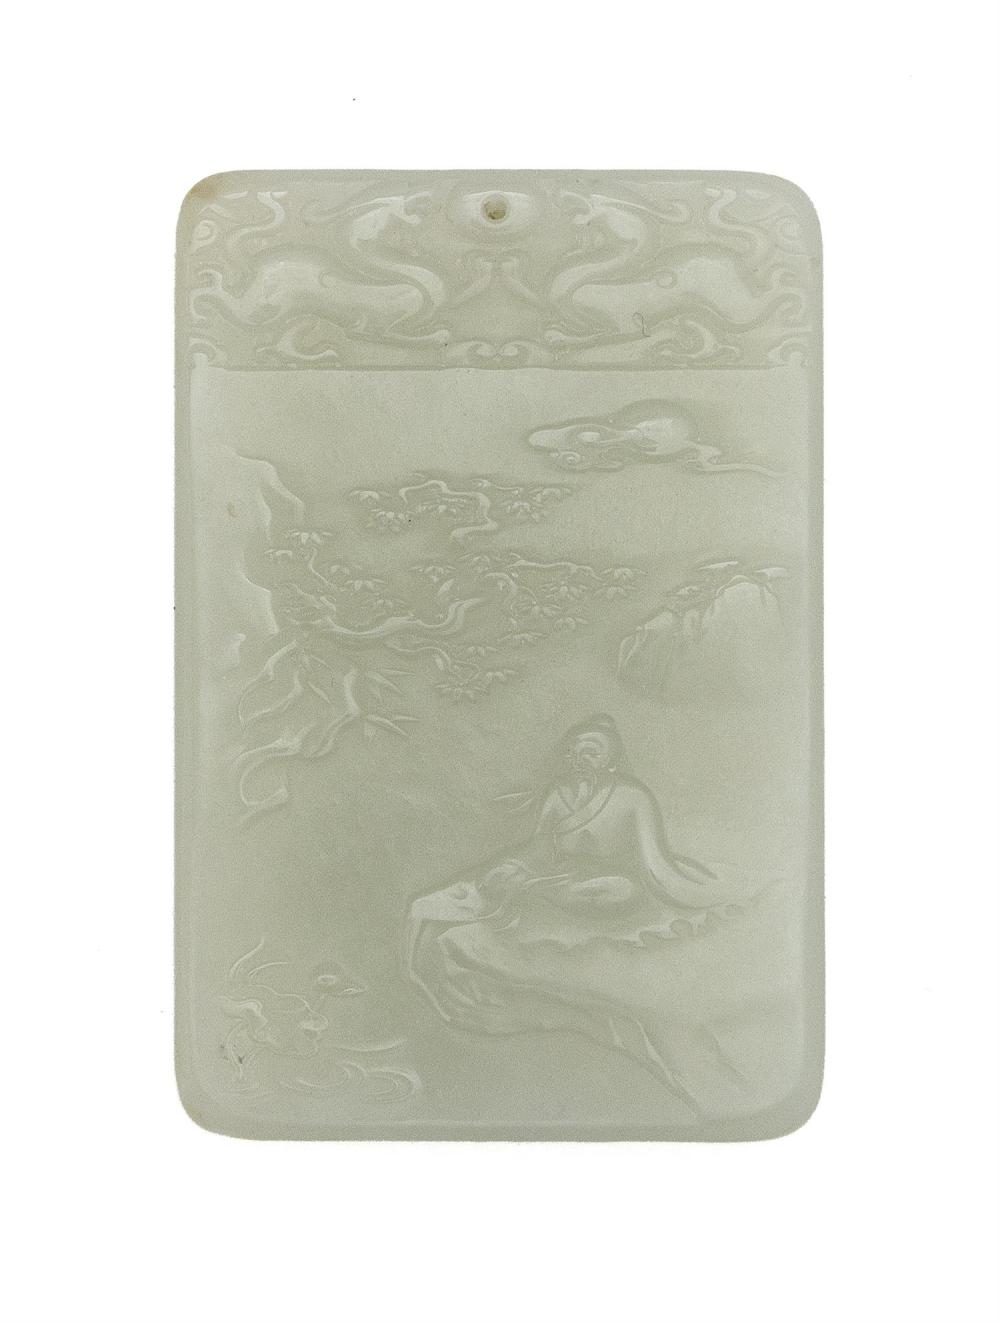 CHINESE PALE CELADON JADE CARVED 34c2a8